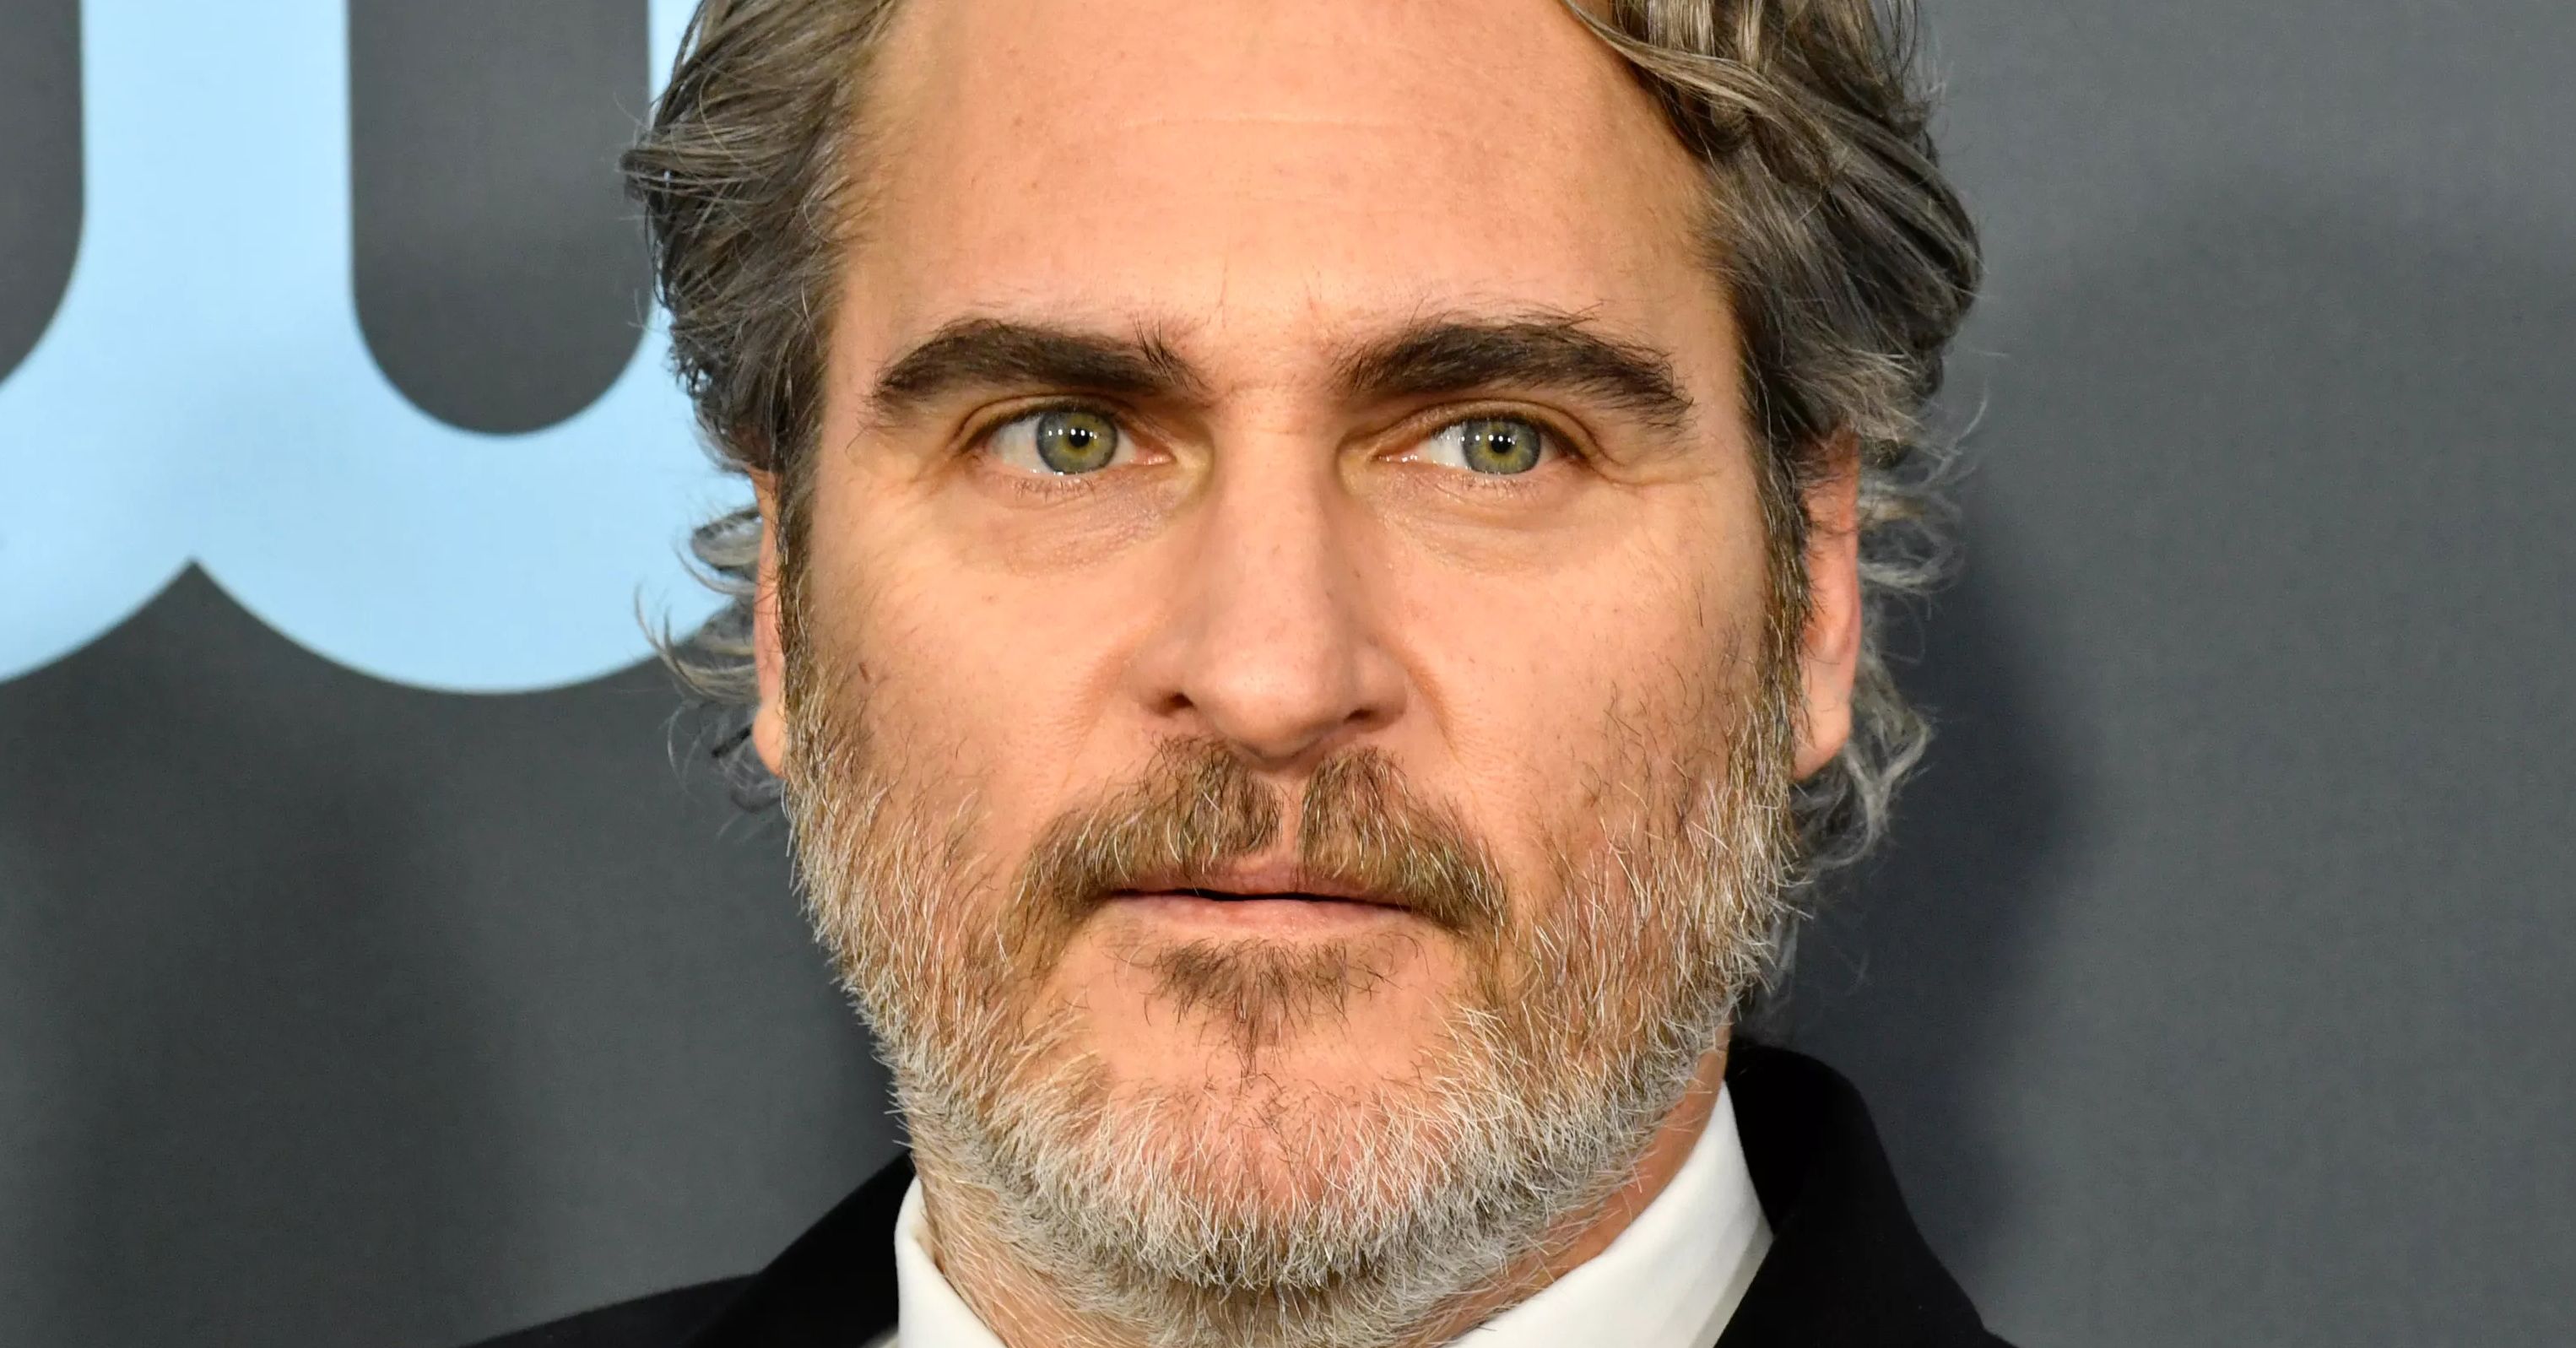 Joaquin Phoenix Calls Out 'Systemic Racism' During BAFTA Award Acceptance Speech